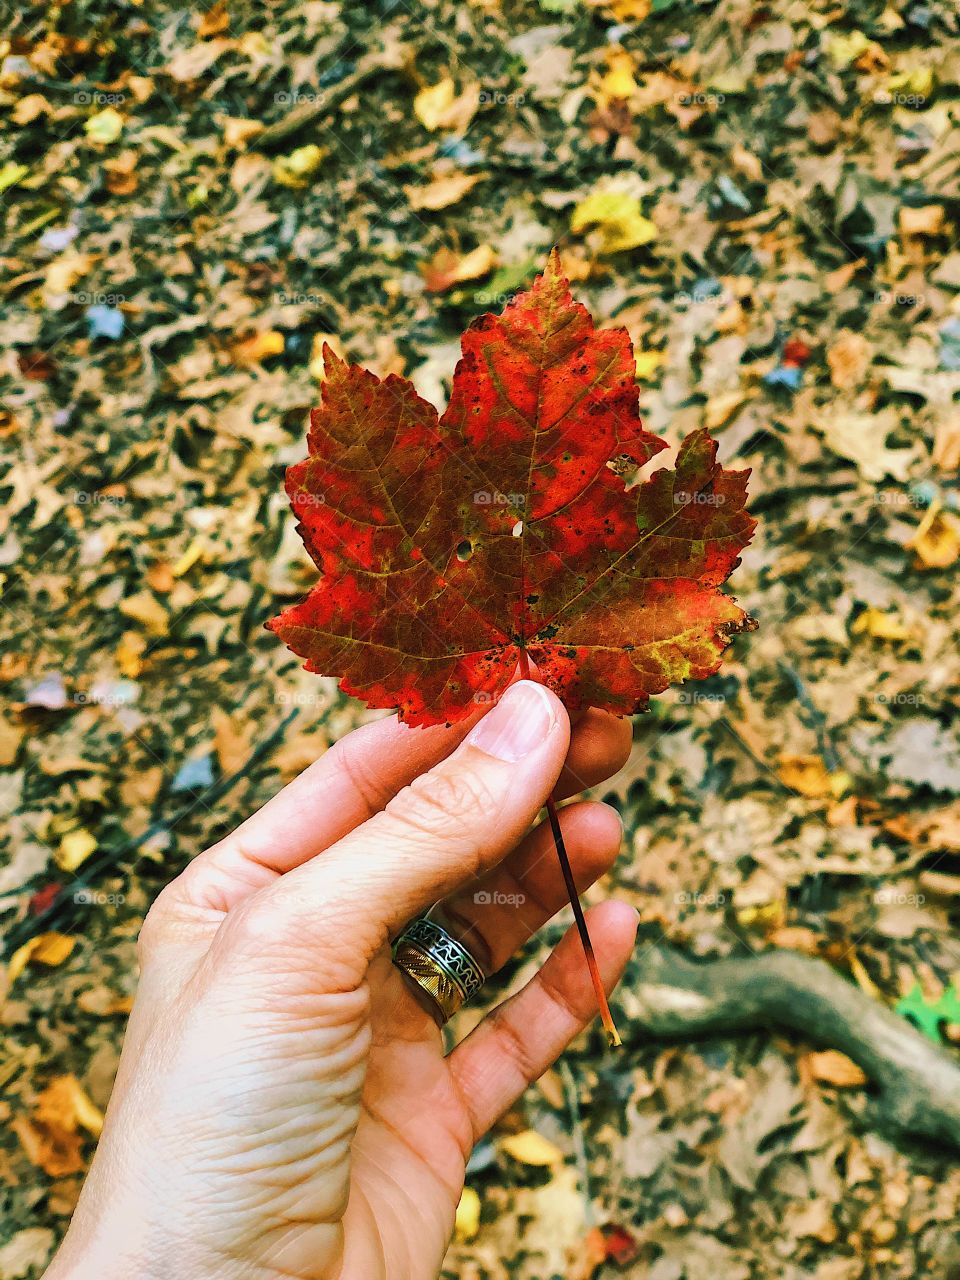 First Signs Of Autumn, Red Leaf In Woods, Red In The Forest, Leaves Changing Color, Fall Time In New York, Cold Springs Harbor 